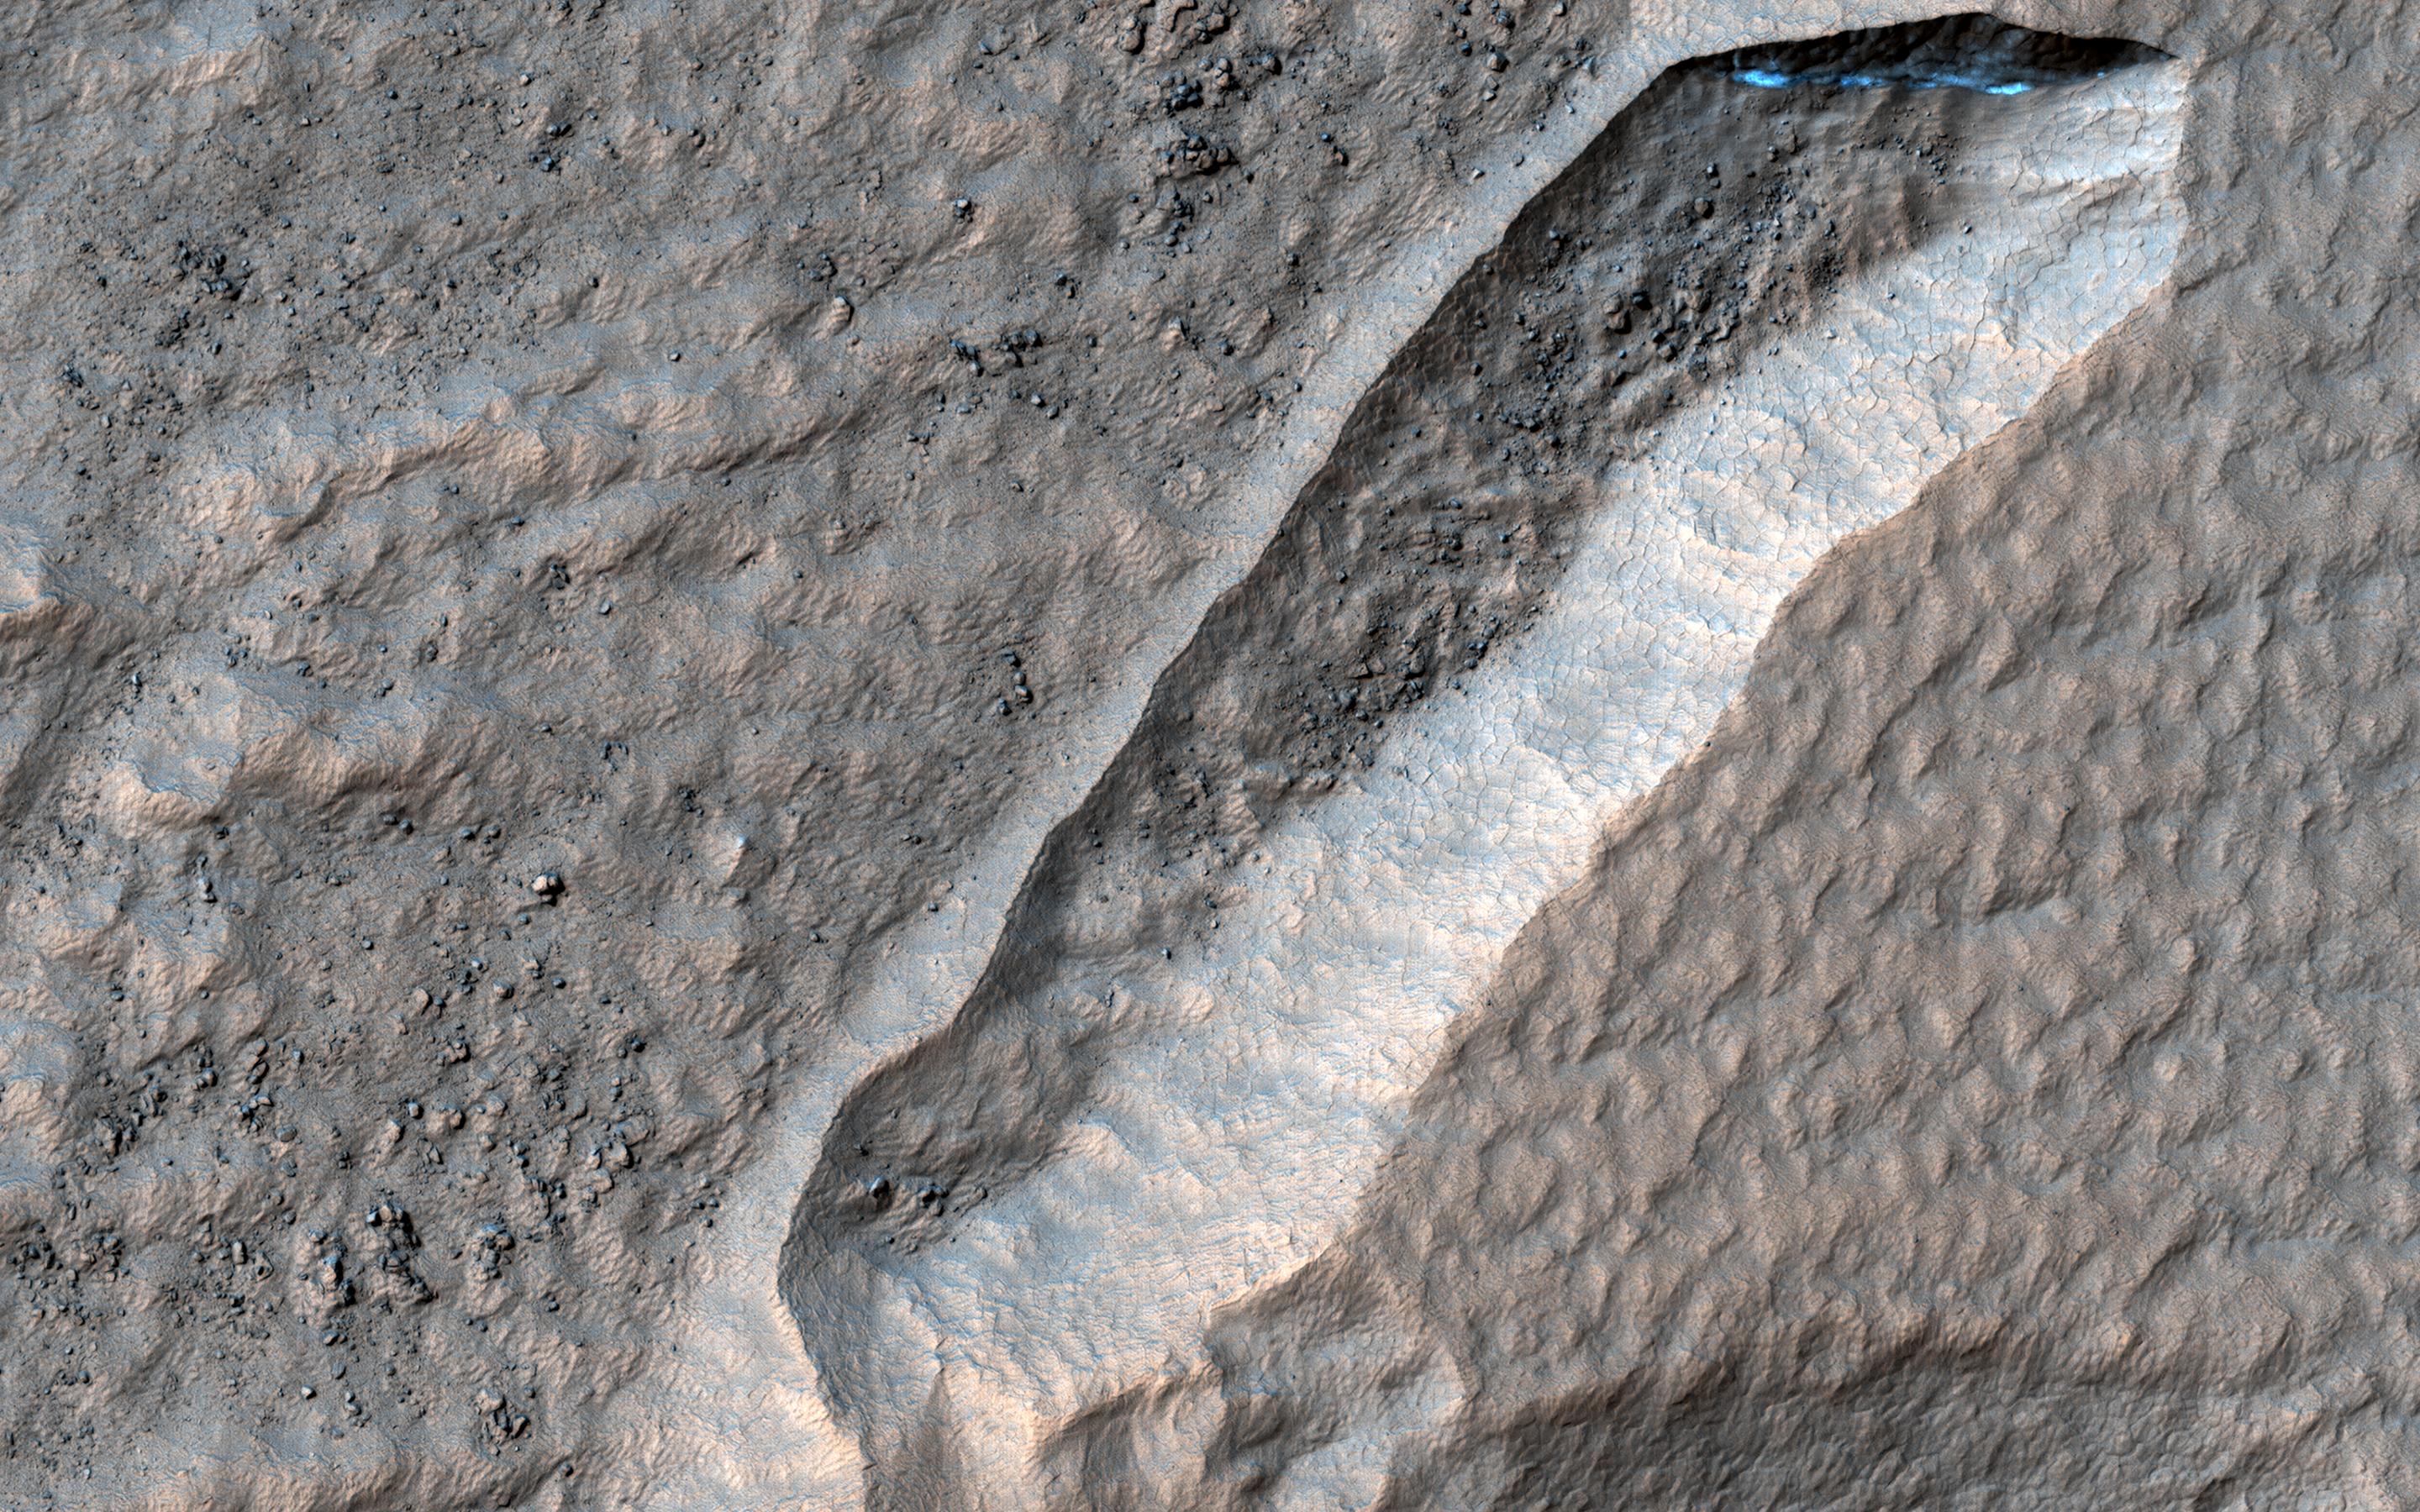 This image acquired on August 14, 2022 by NASAs Mars Reconnaissance Orbiter shows a curious depression with zig-zag walls on the north rim of Secchi Crater.